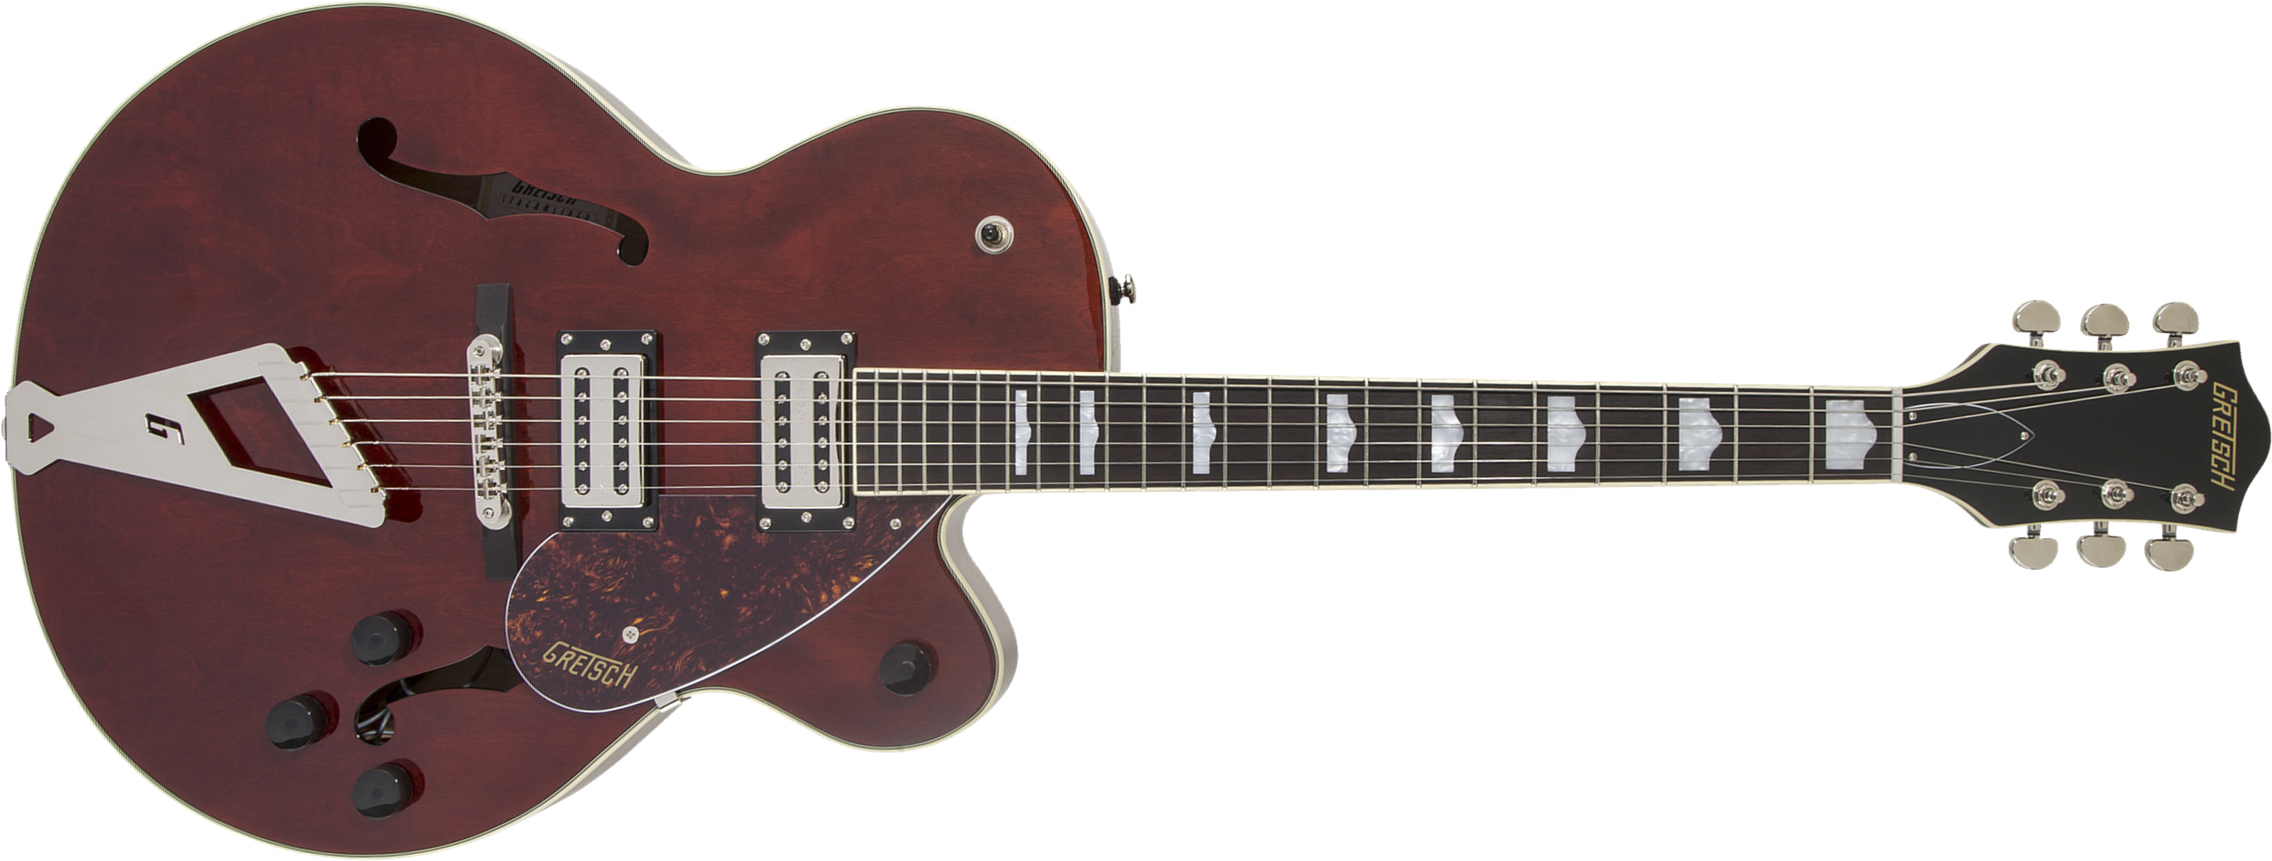 Gretsch G2420 Streamliner Hollow Body With Chromatic Ii Hh Ht Lau - Walnut - Guitare Électrique 1/2 Caisse - Main picture